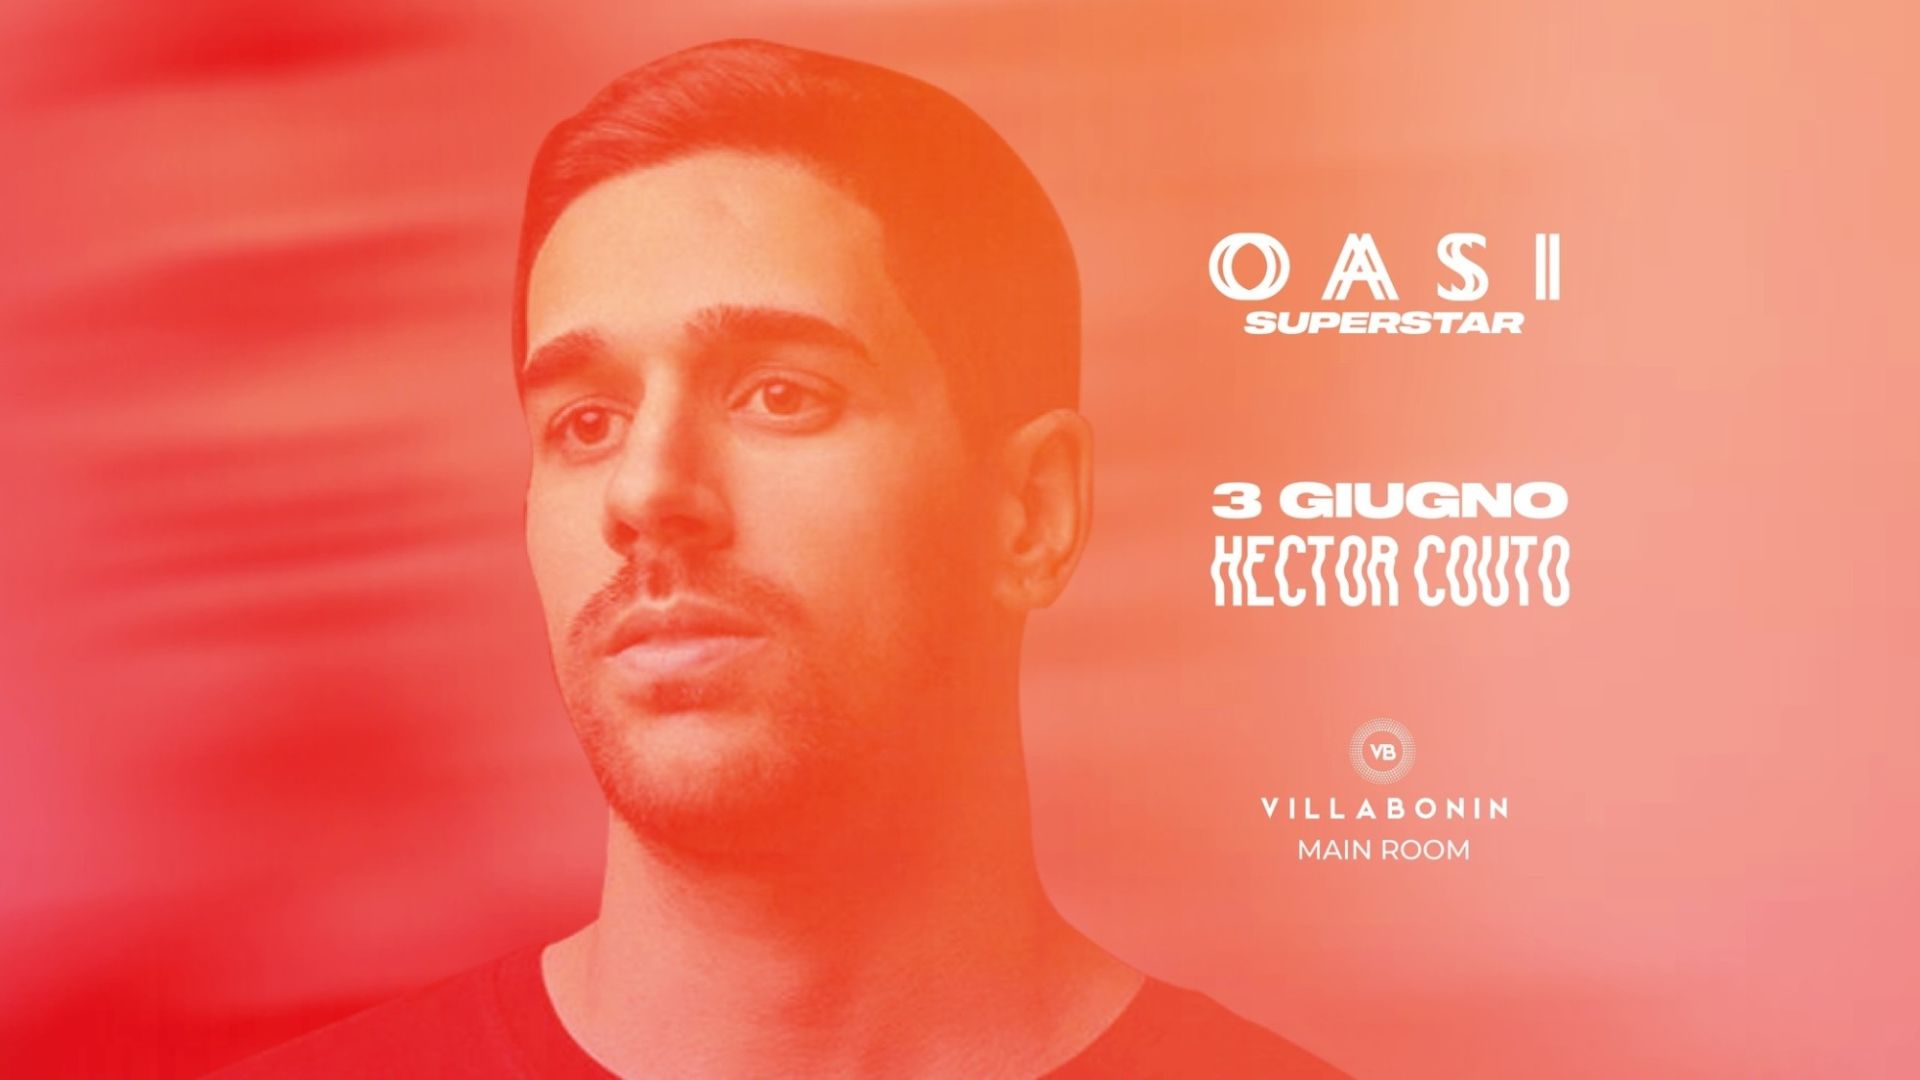 Oasi Superstar w/ Hector Couto